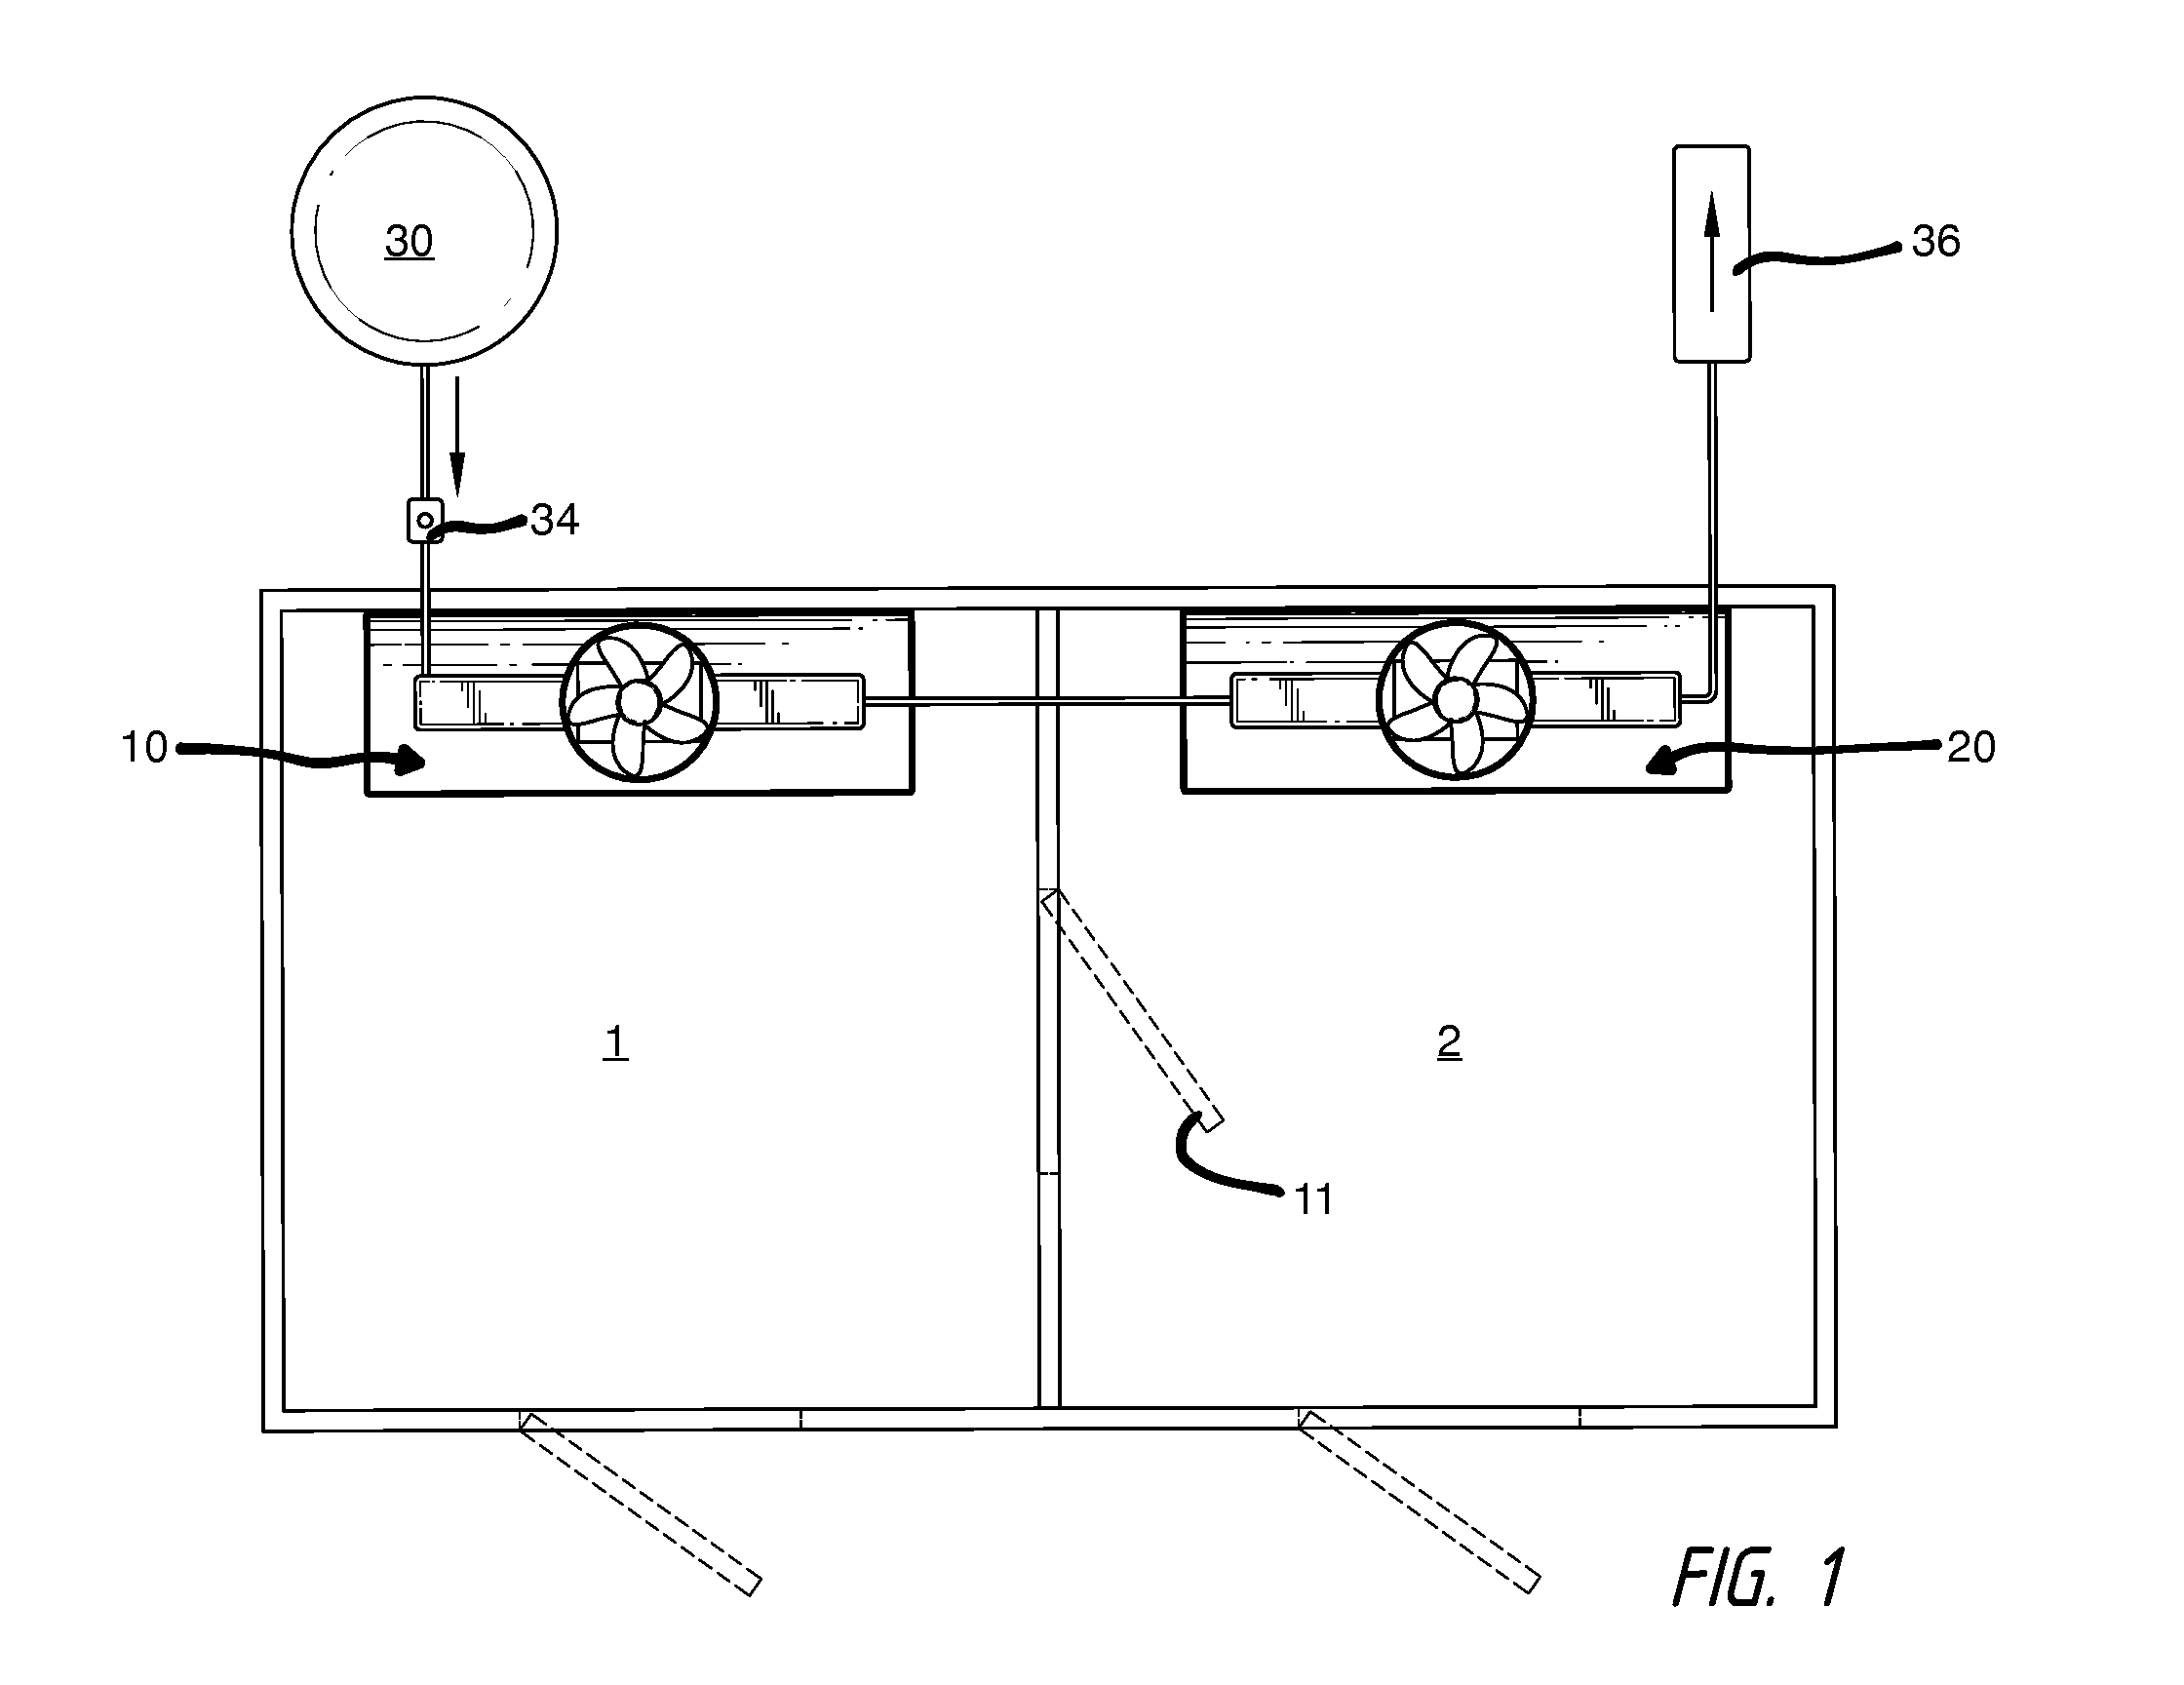 Method and Apparatus for Uniform Total Body Cryotherapy